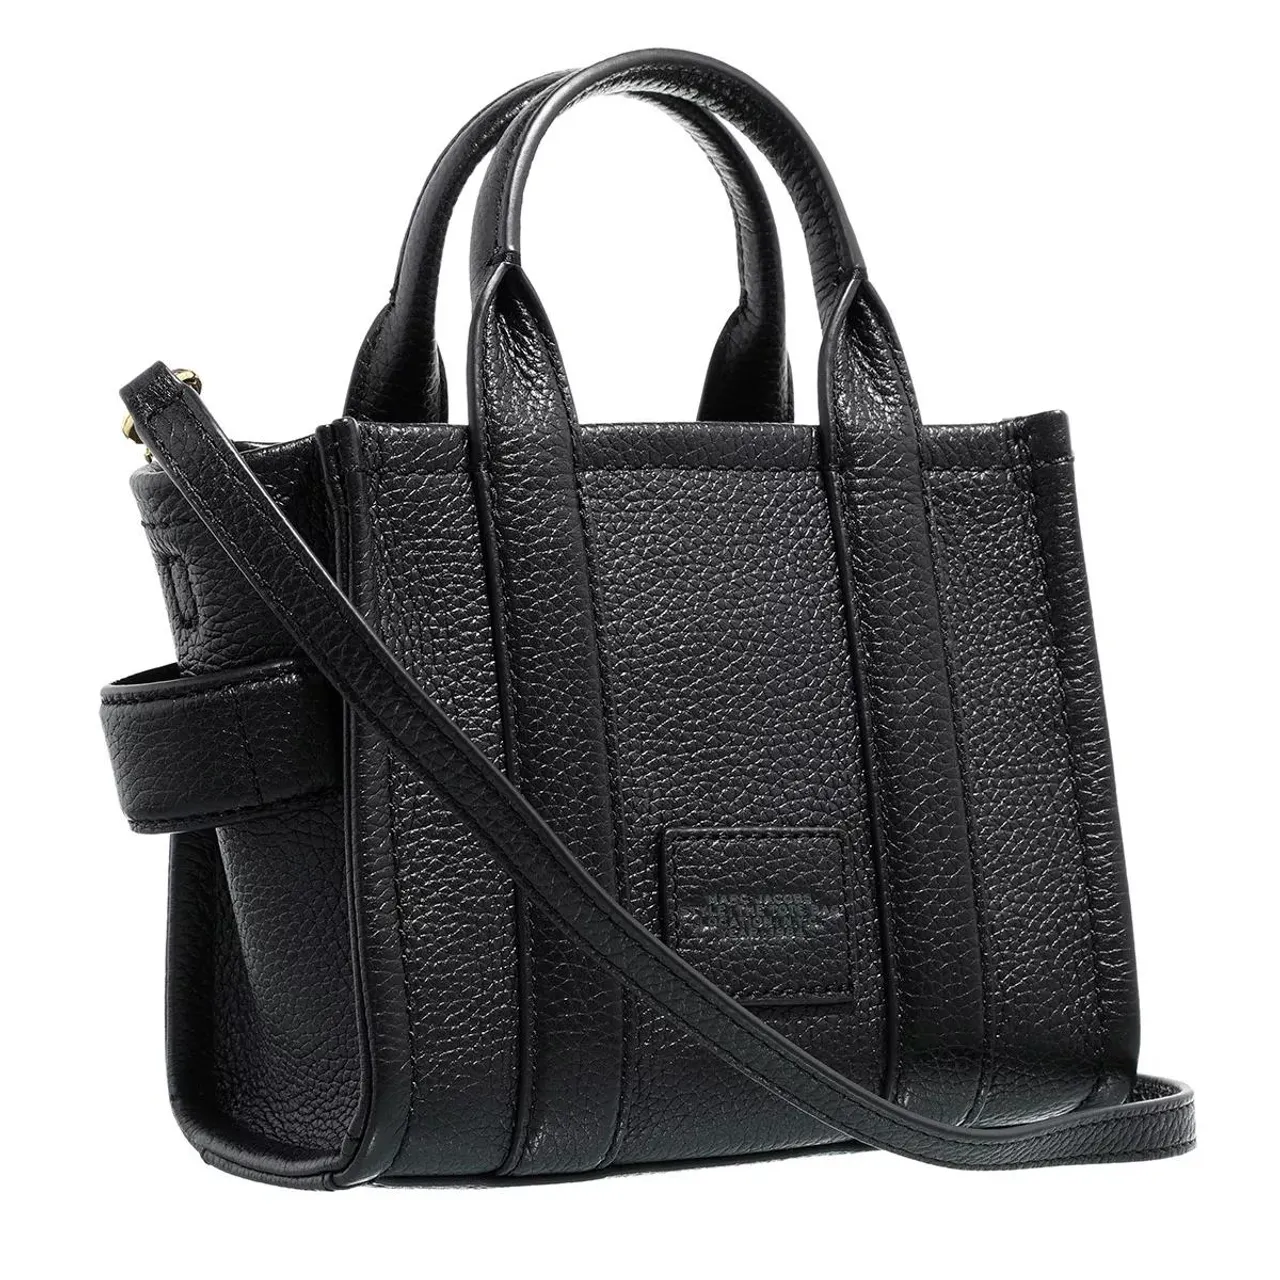 Marc Jacobs Tote Bags - Leather Tote Bag - black - Tote Bags for ladies